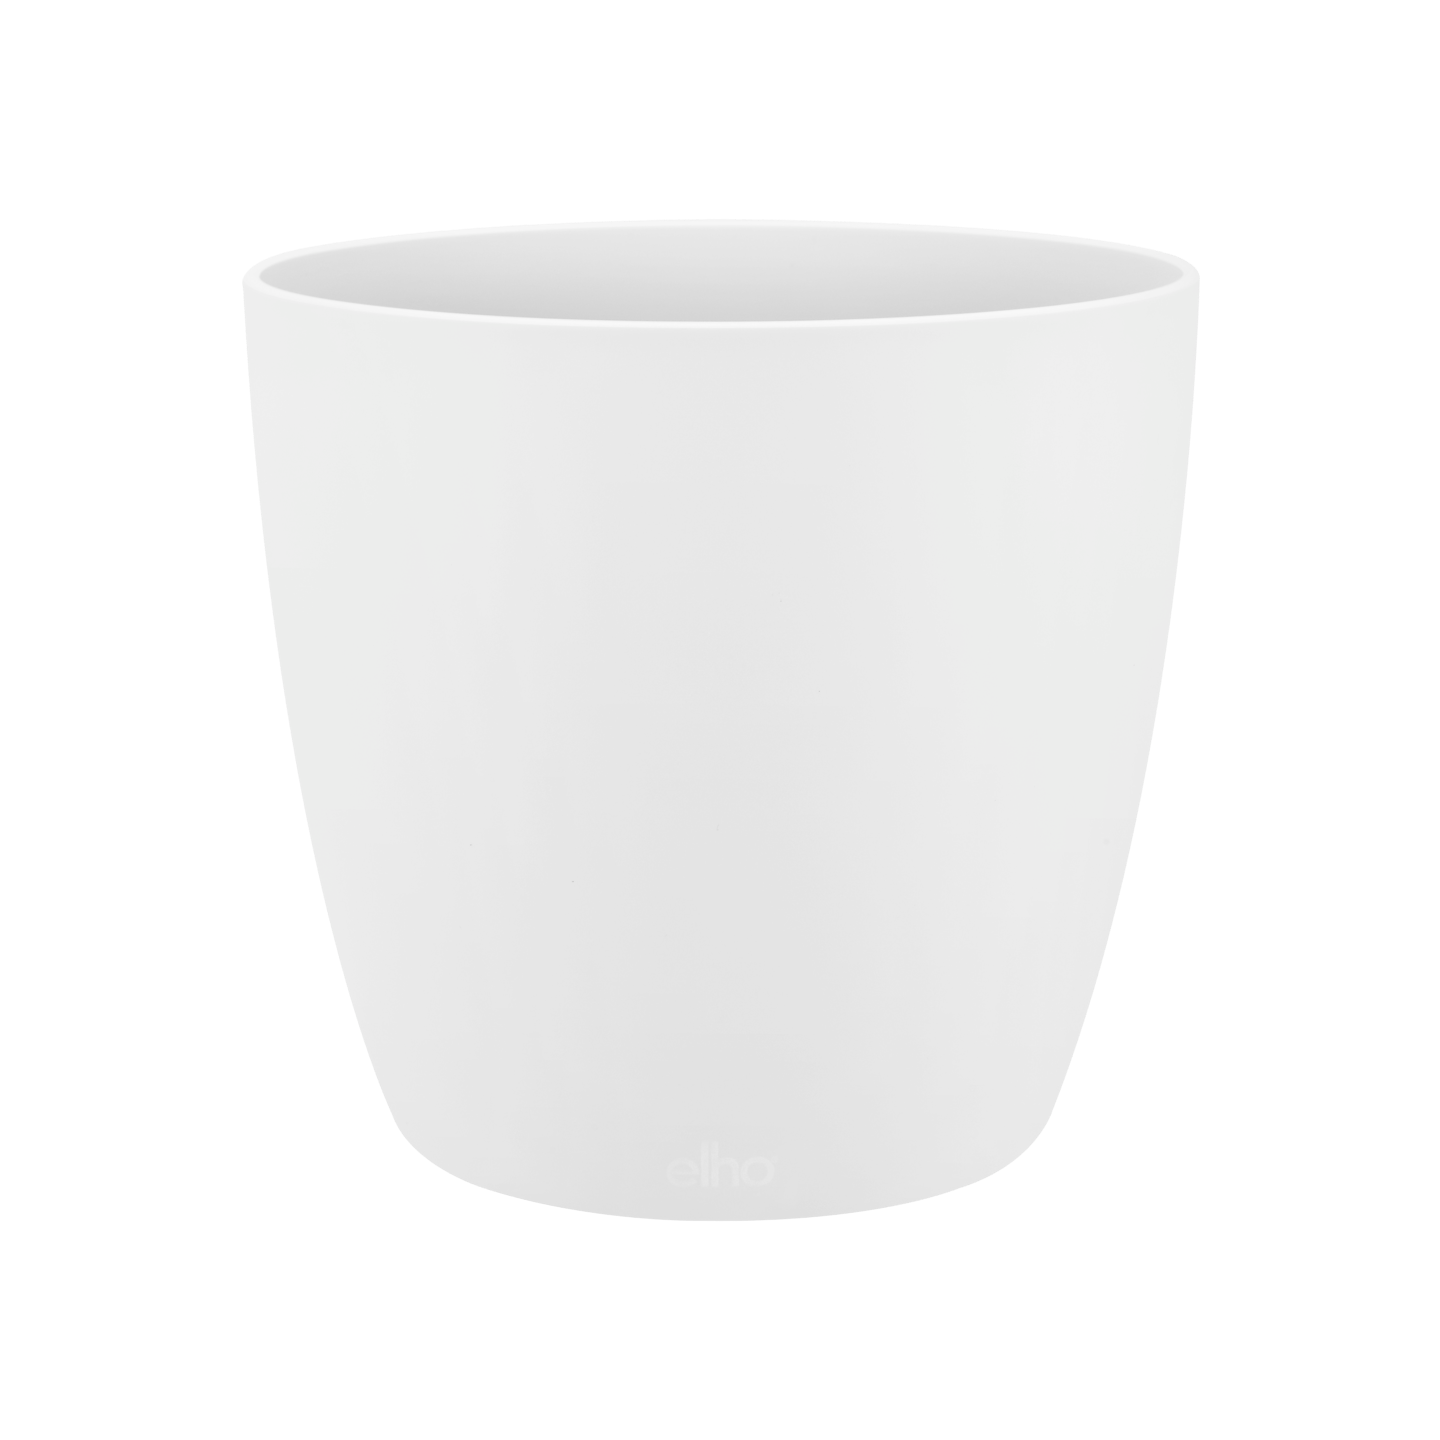 White brussels round plant pot